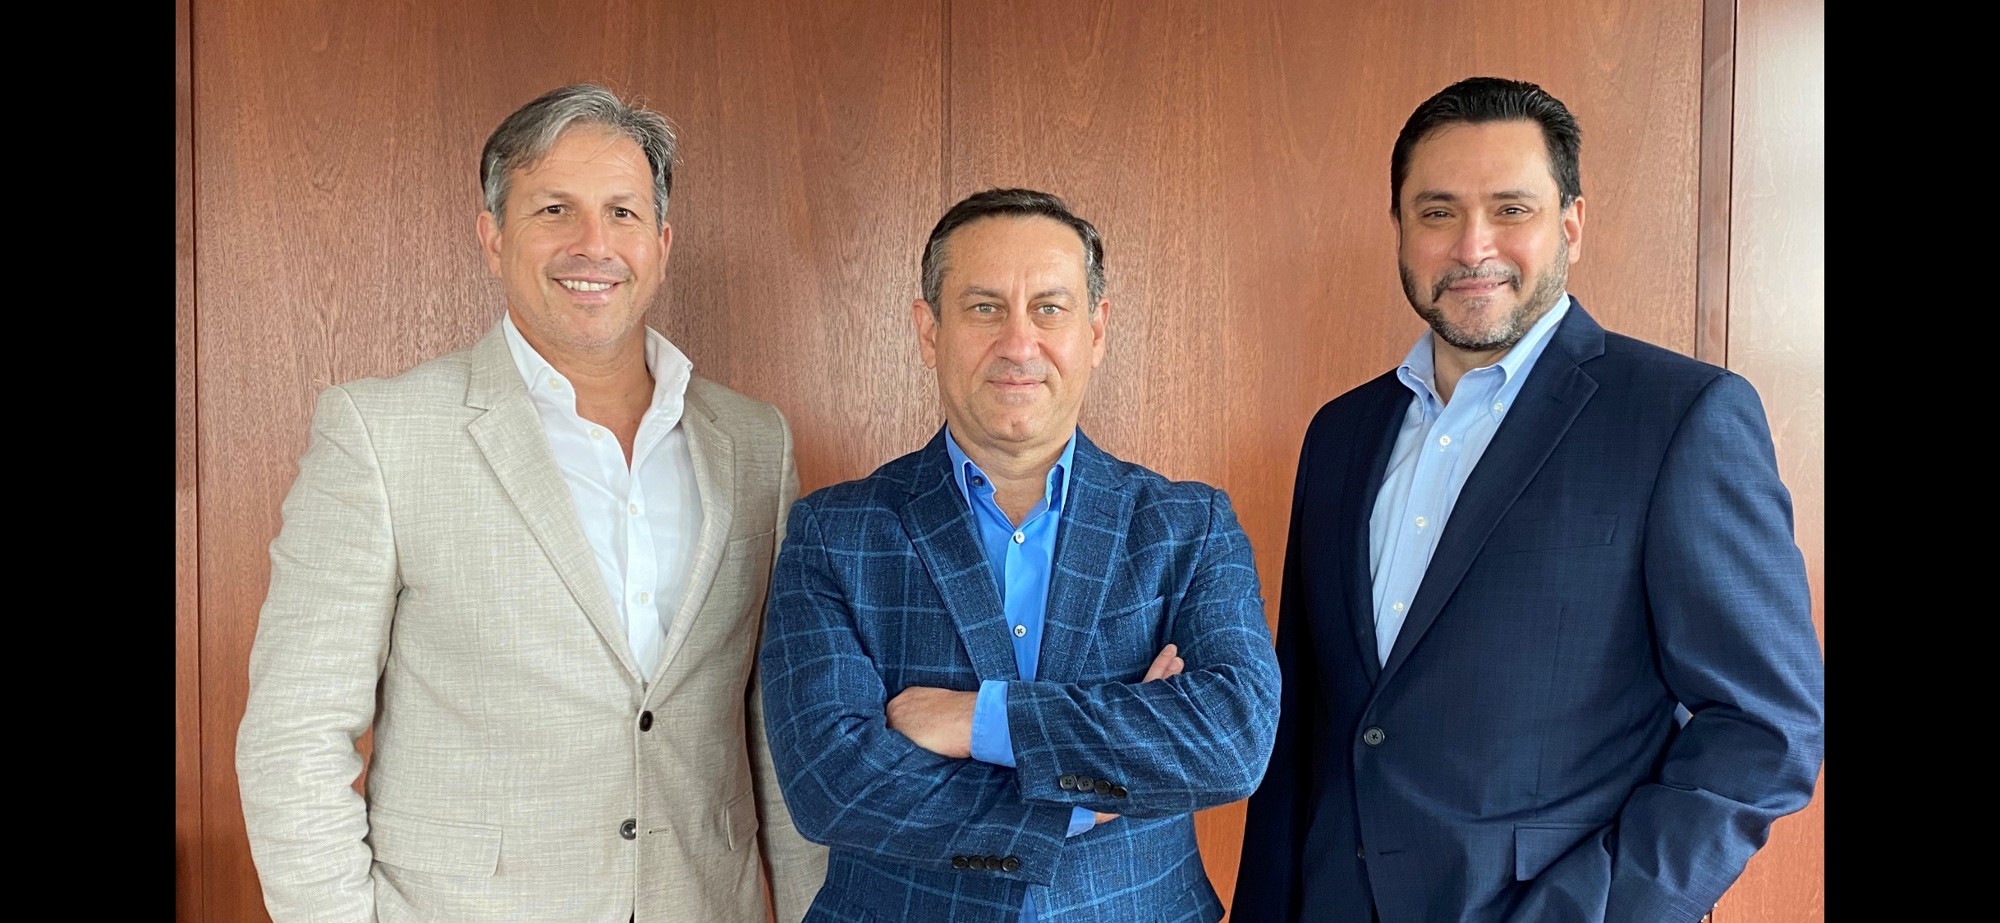 Courtesy. RAM Capital Management partners, from left, Andre Nunes, Rogerio De Laurenzi and Manuel Borrajo. They own two assisted living facilities under the Green Village brand, one in Naples and one in Venice.